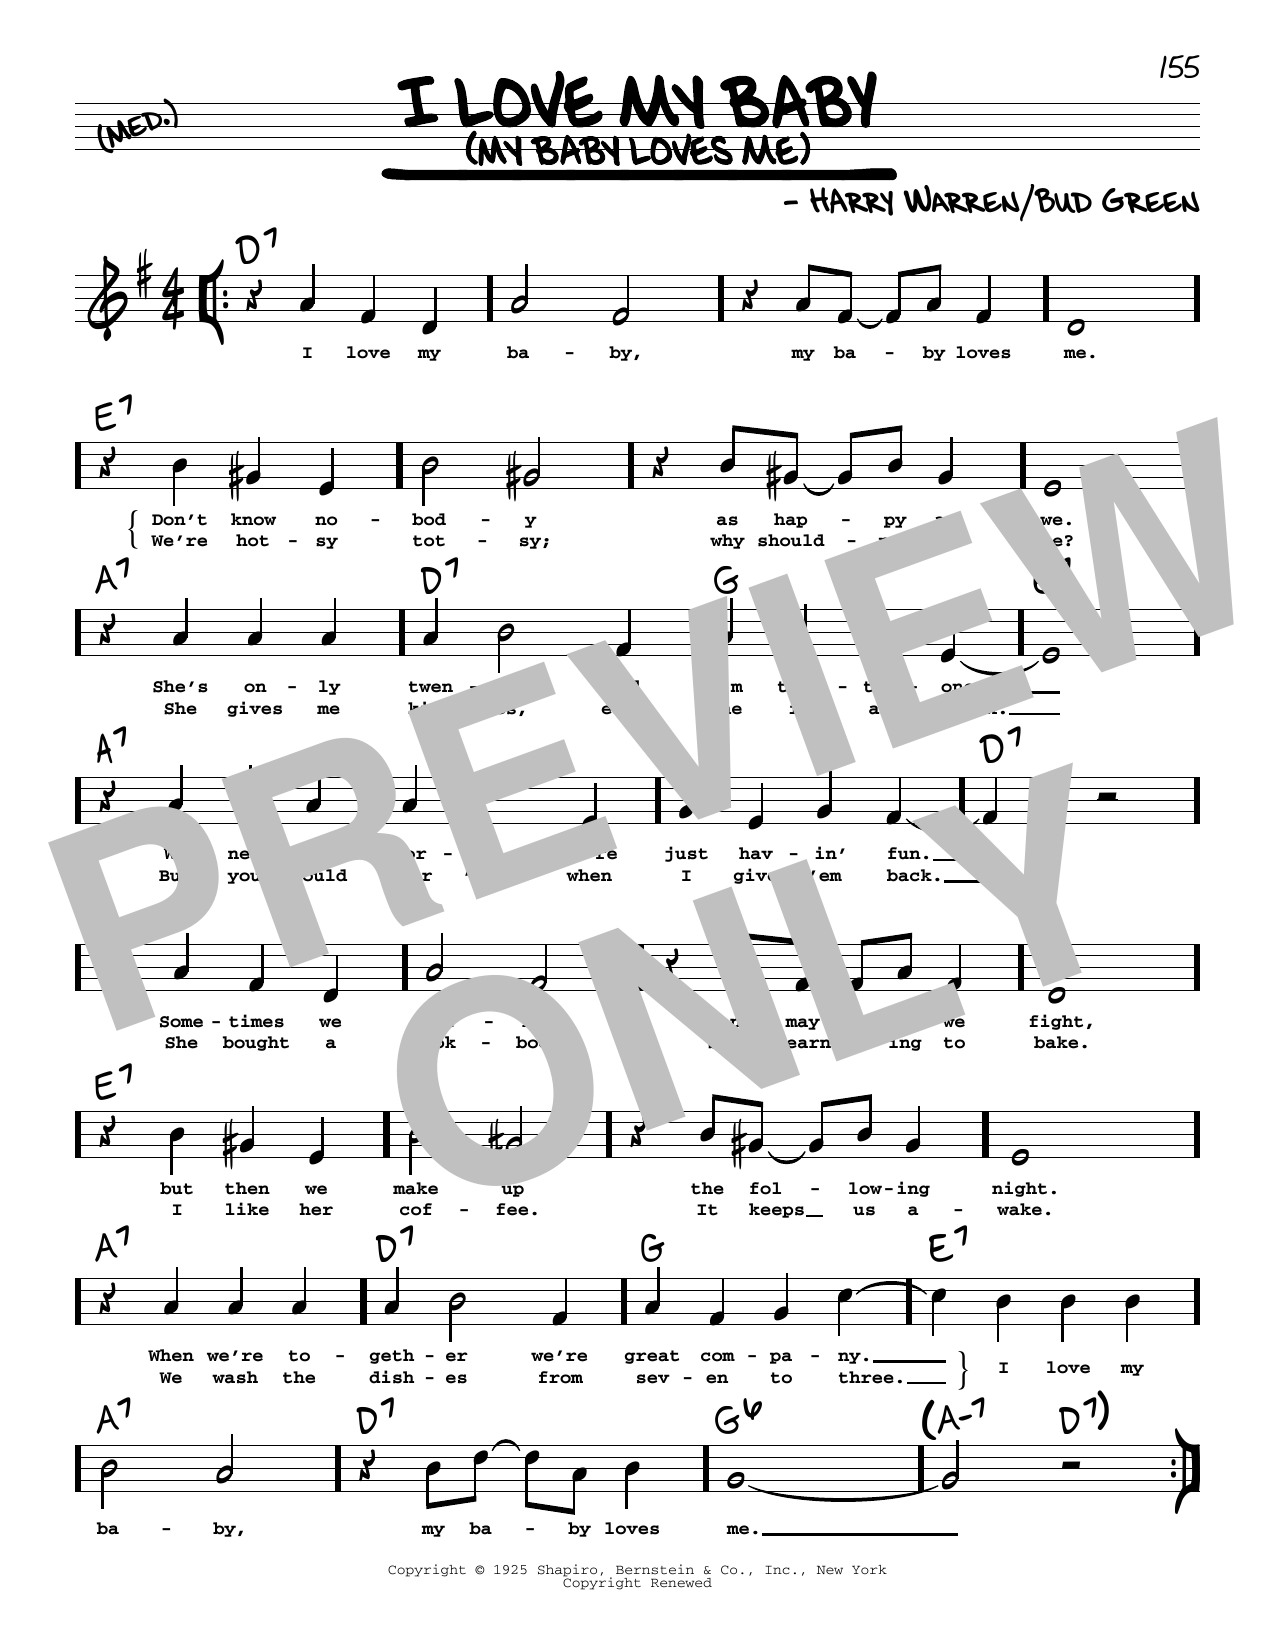 Download Harry Warren and Bud Green I Love My Baby (My Baby Loves Me) (High Sheet Music